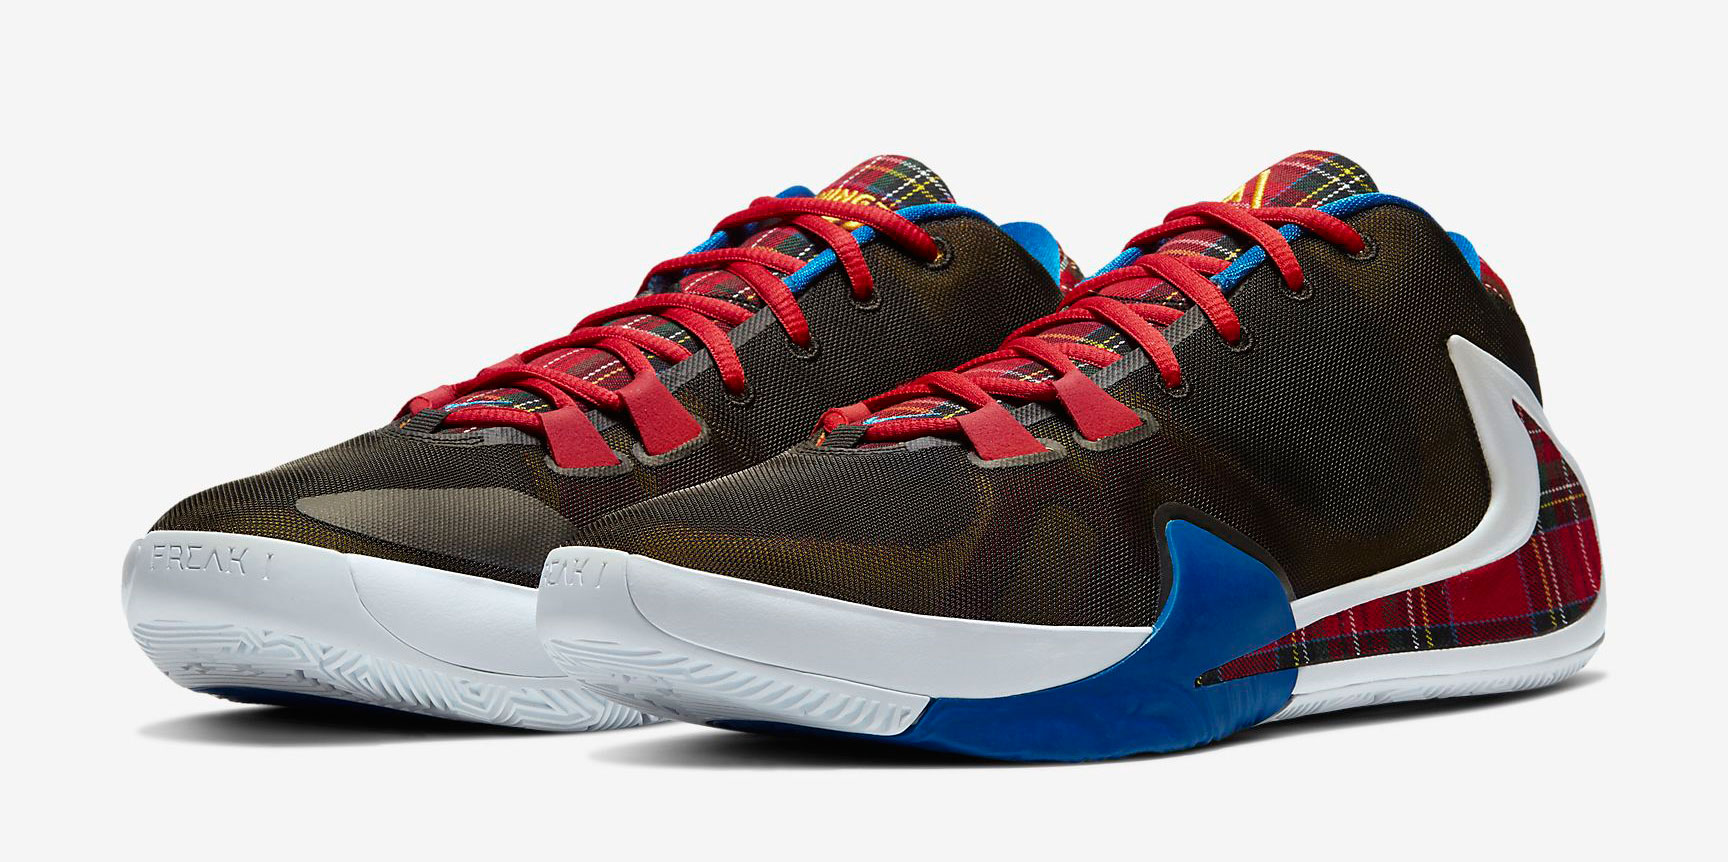 nike-zoom-freak-1-all-star-employee-of-the-month-release-date-1